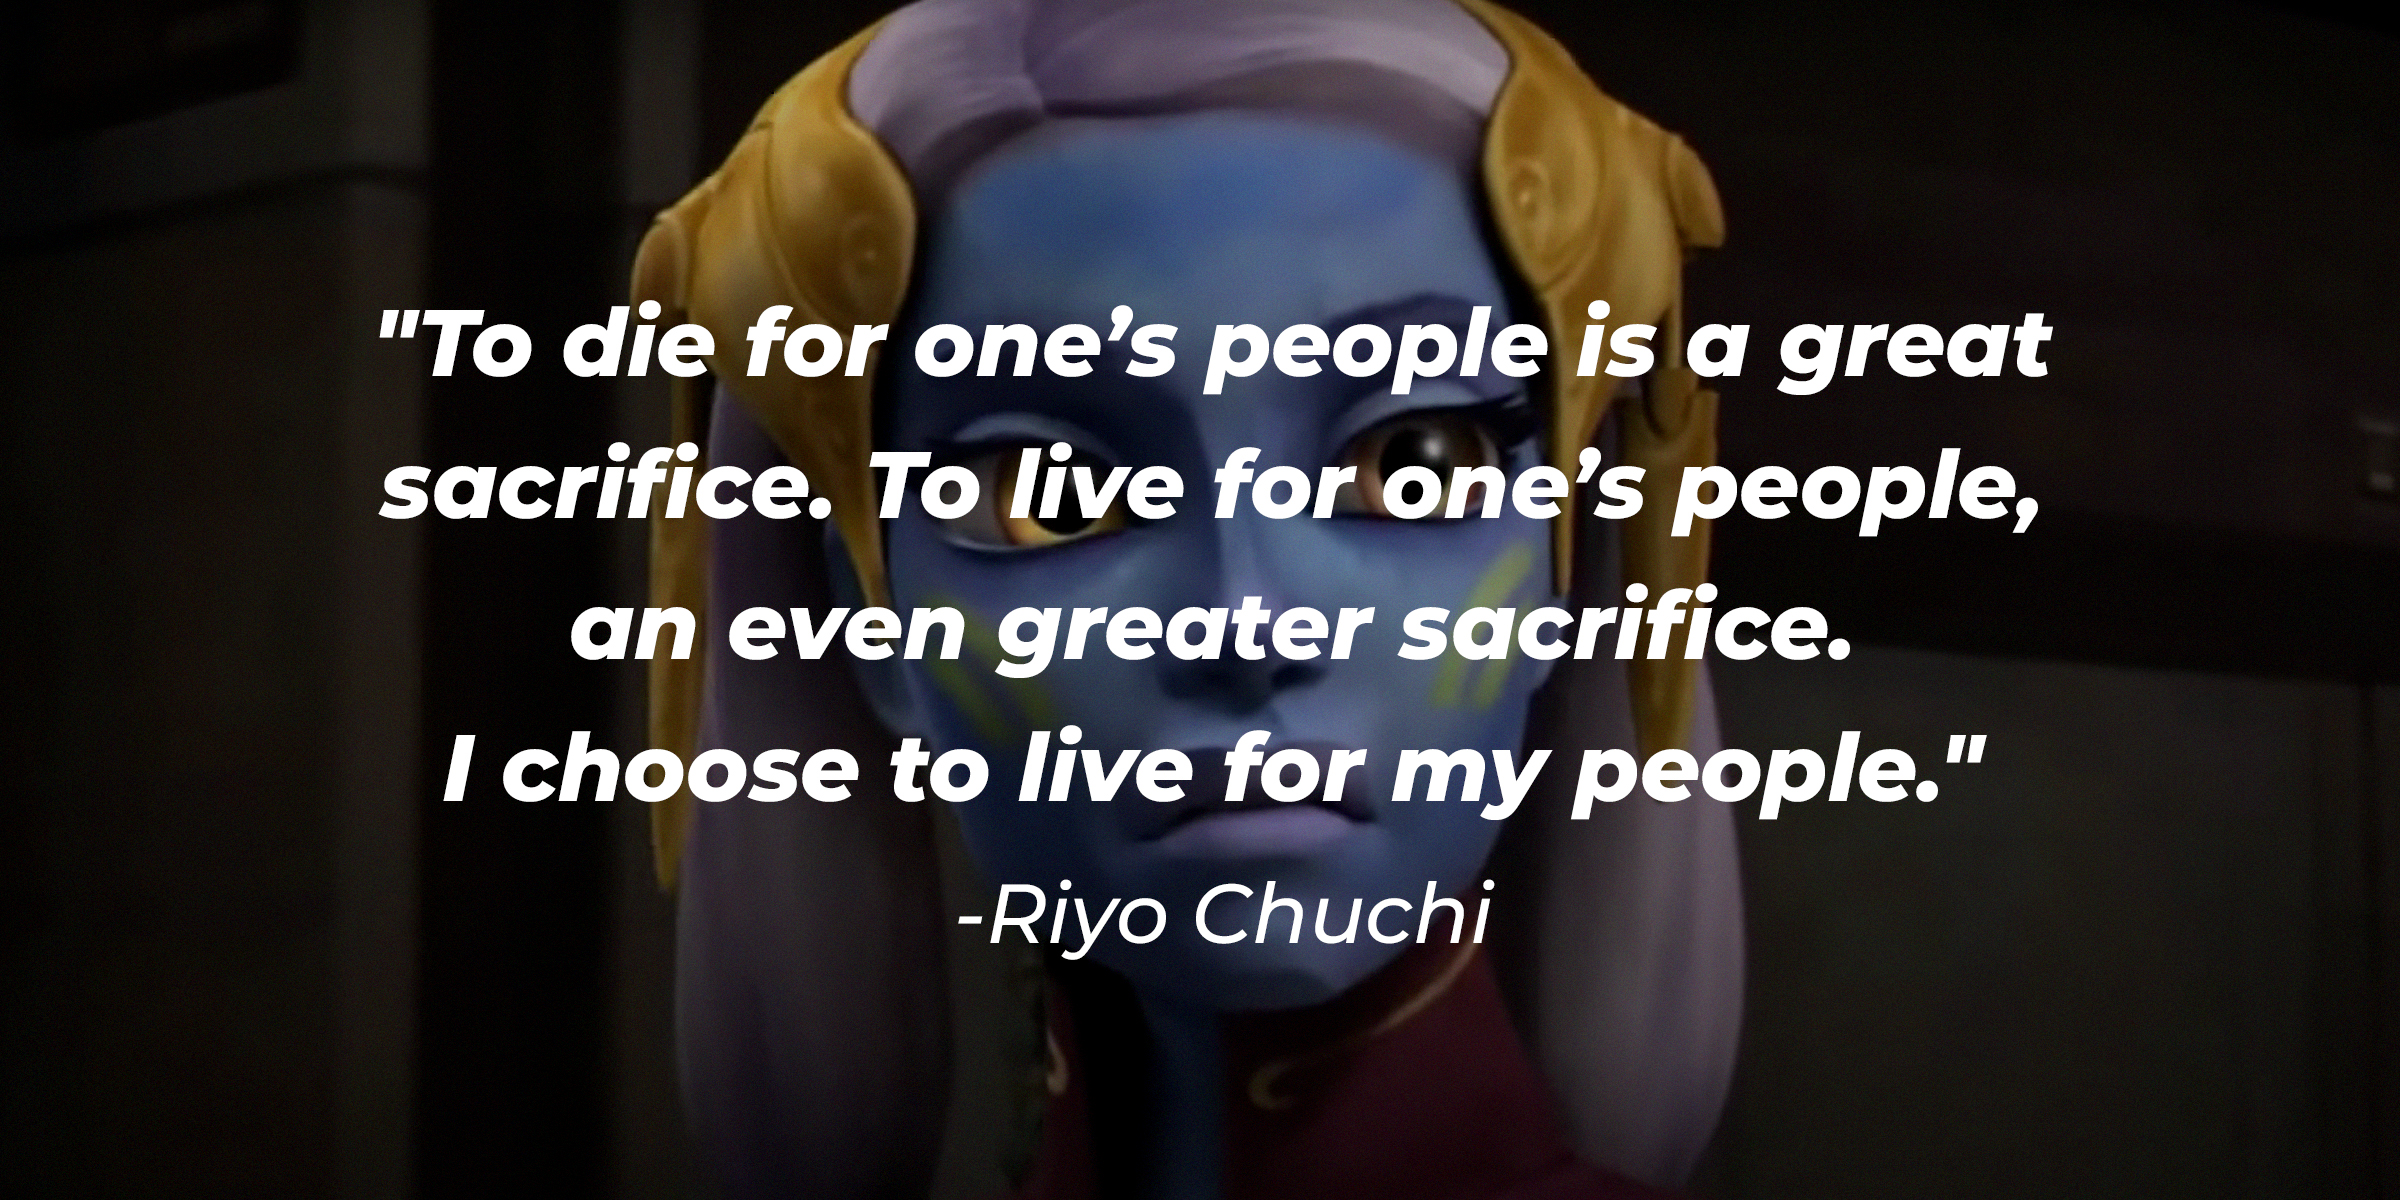 A photo of Riyo Chuchi with Riyo Chuchi's quote: "To die for one’s people is a great sacrifice. To live for one’s people, an even greater sacrifice. I choose to live for my people." | Source: youtube.com/StarWarsMeg